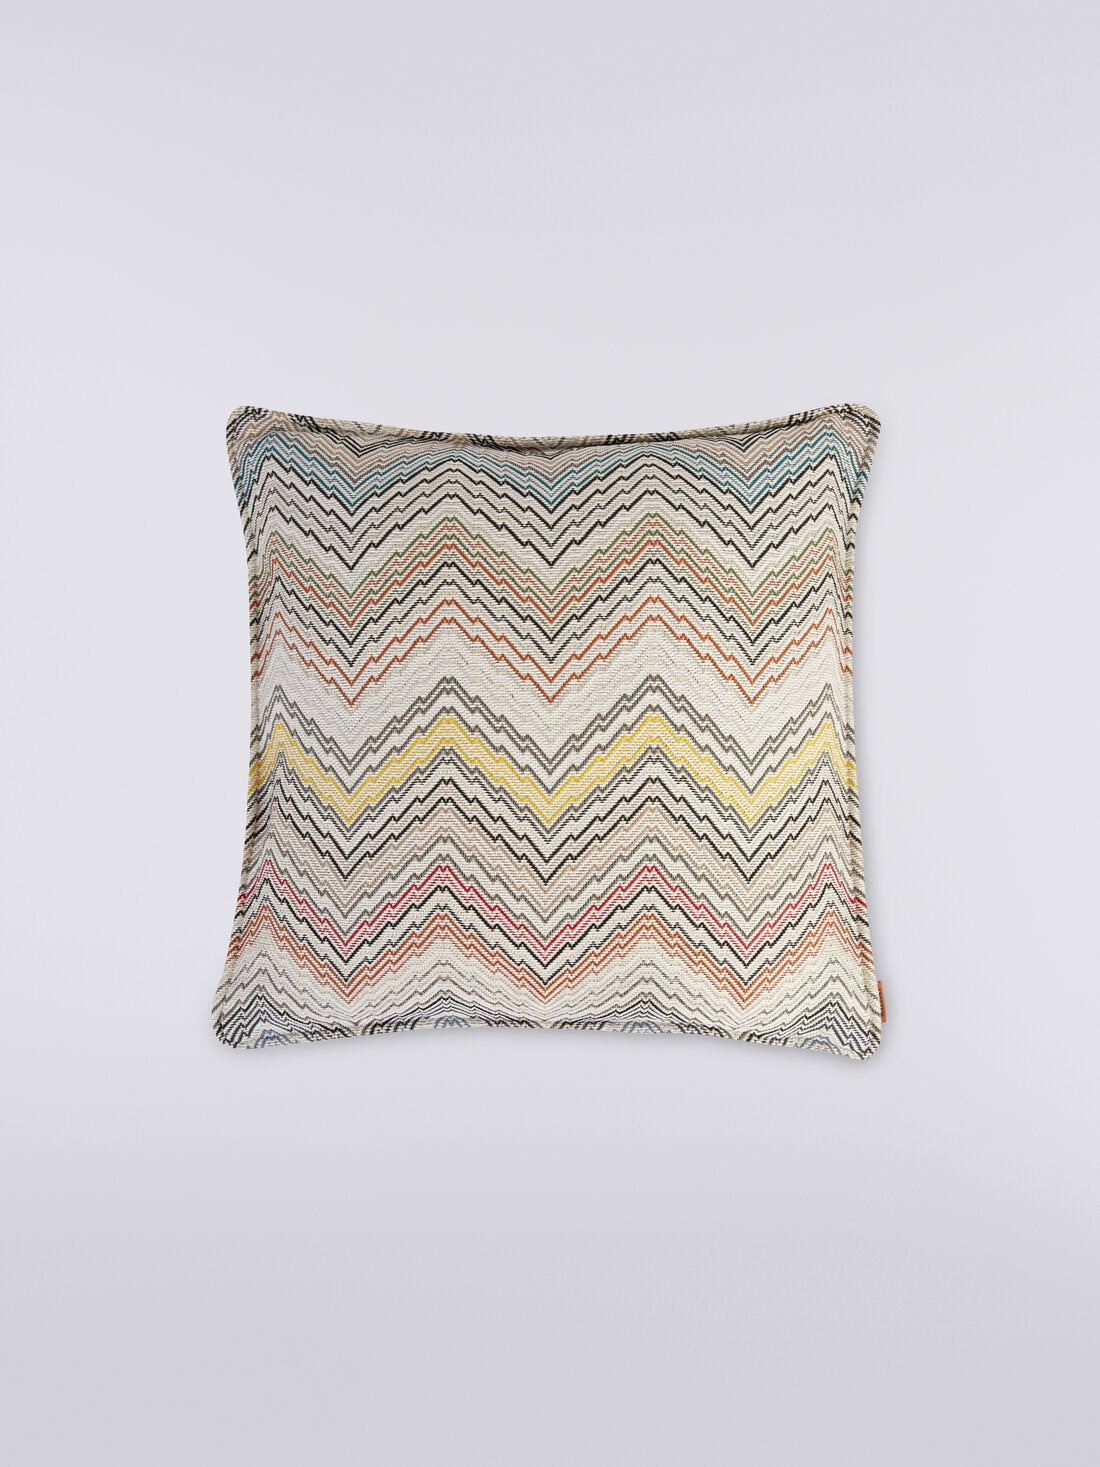 Milano 40x40 cm cushion with knitted effect, White  - 8051575840593 - 0